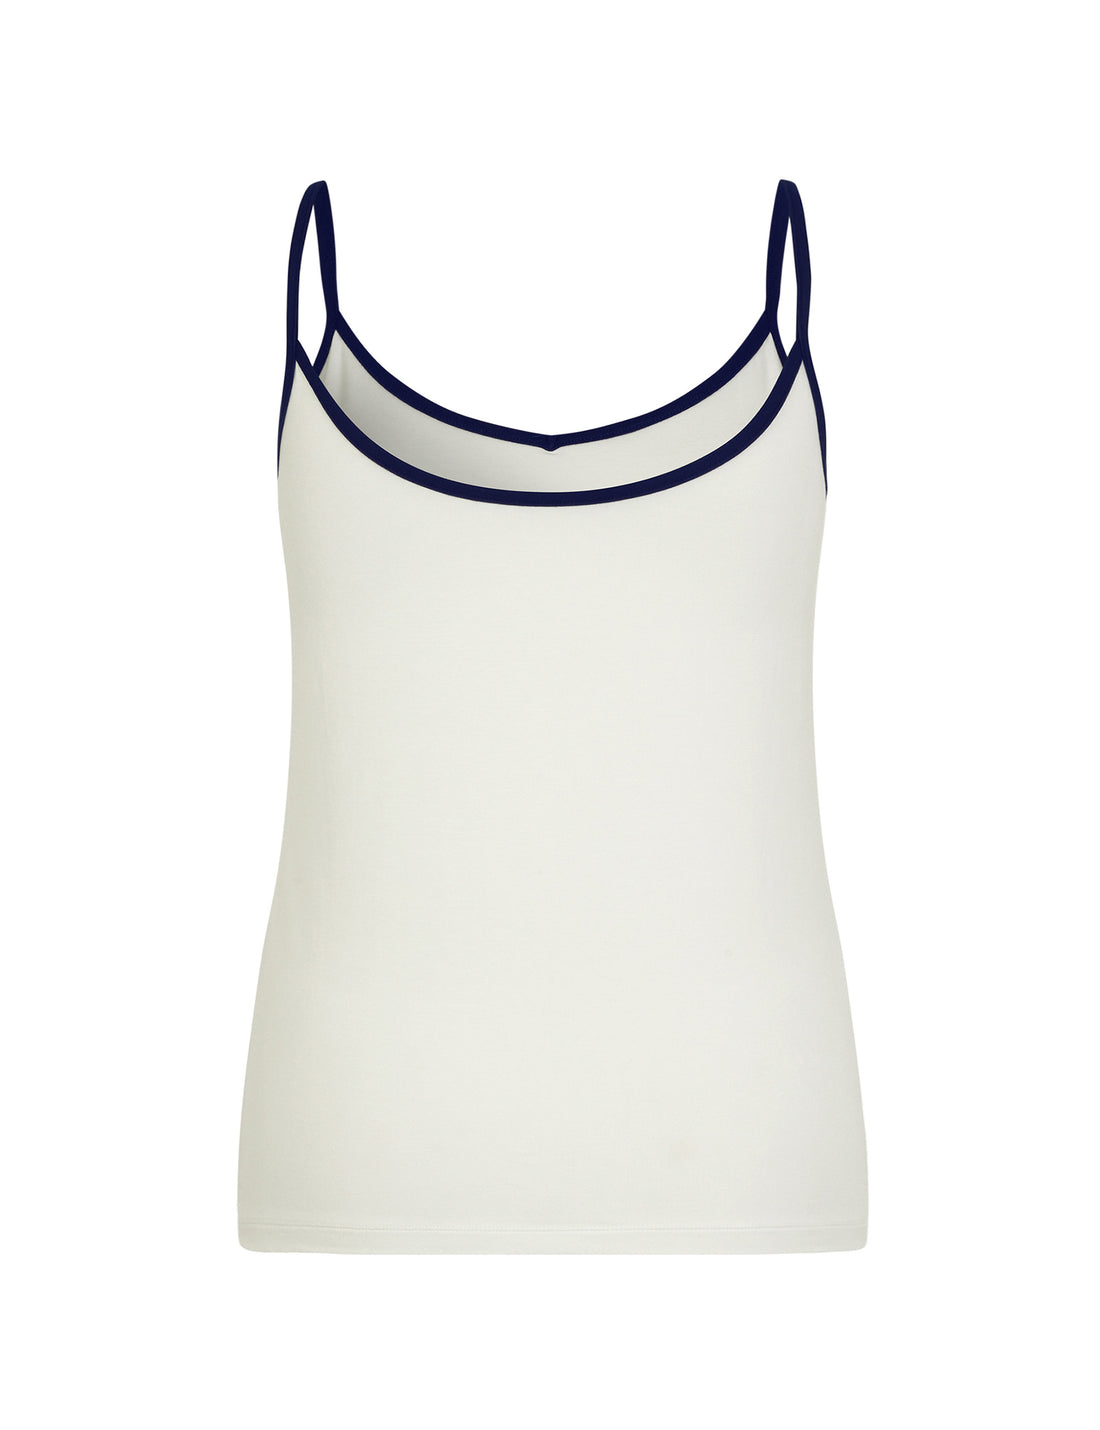 Boo strap top off white/navy